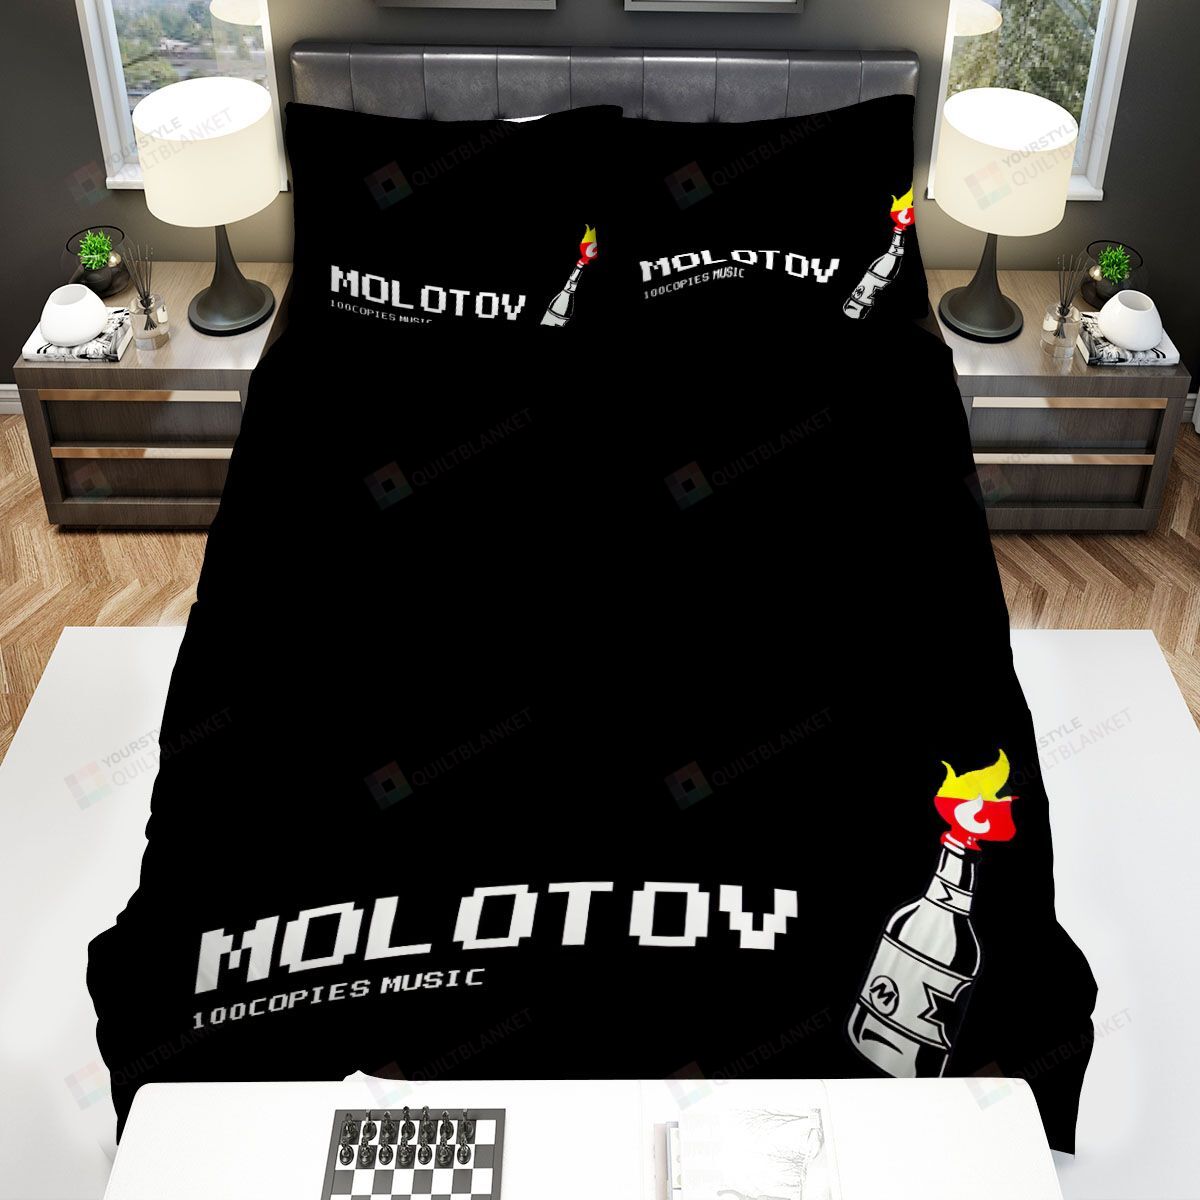 Molotov Band 100 Copies Music Bed Sheets Spread Comforter Duvet Cover Bedding Sets